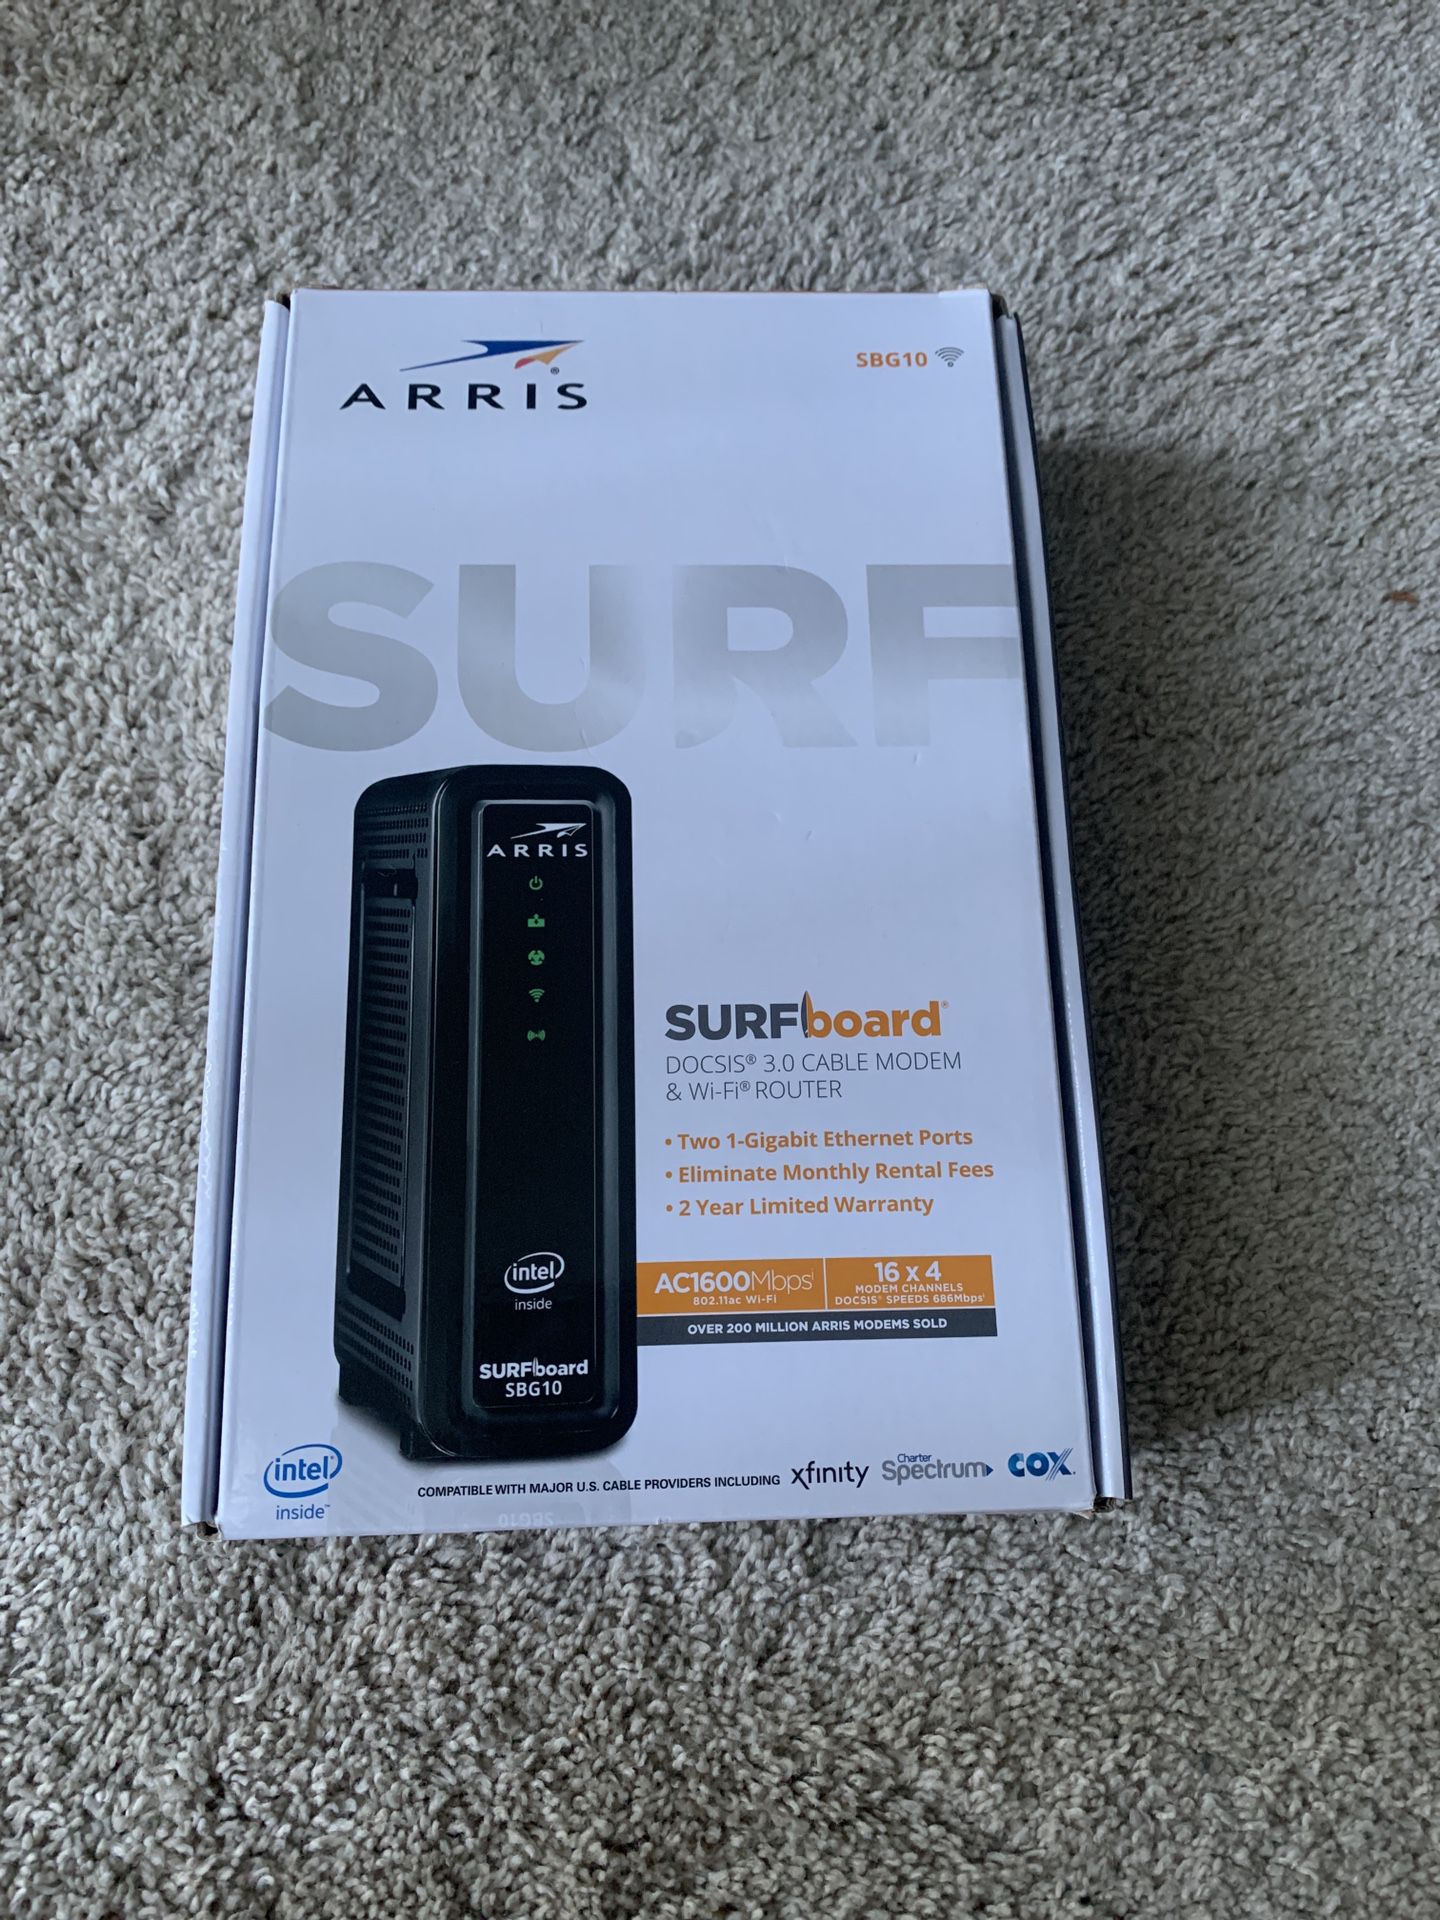 ARRIS SBG10 SURFboard  AC1600 Dual-Band Cable Modem  Router - Black